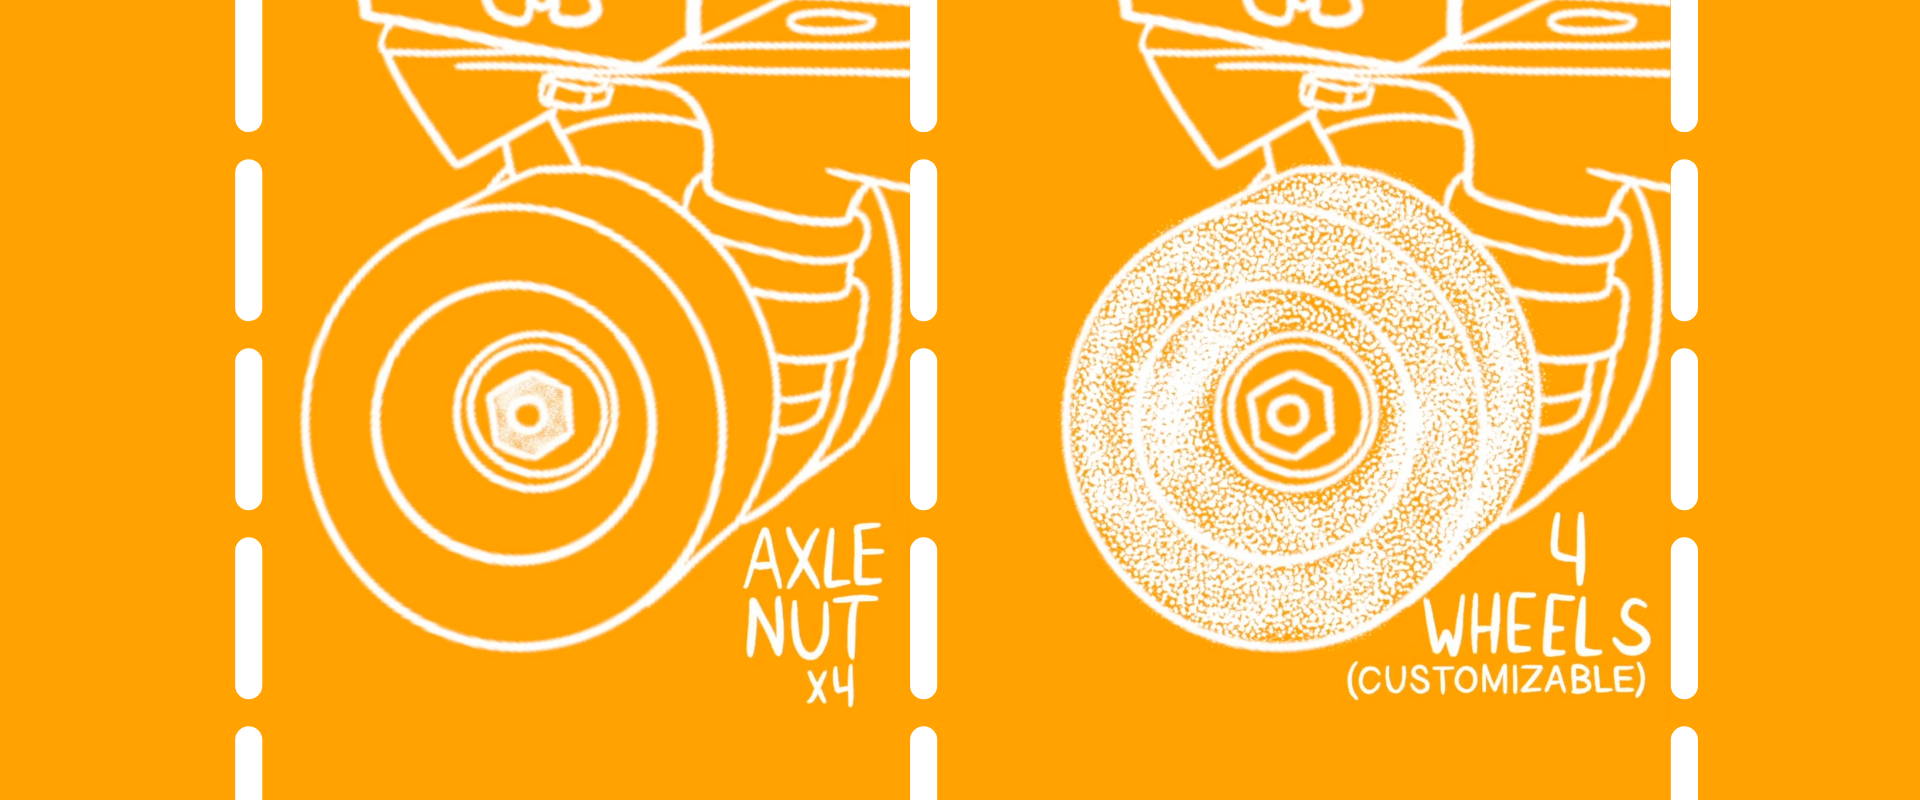 Diagram of axle nut and wheel